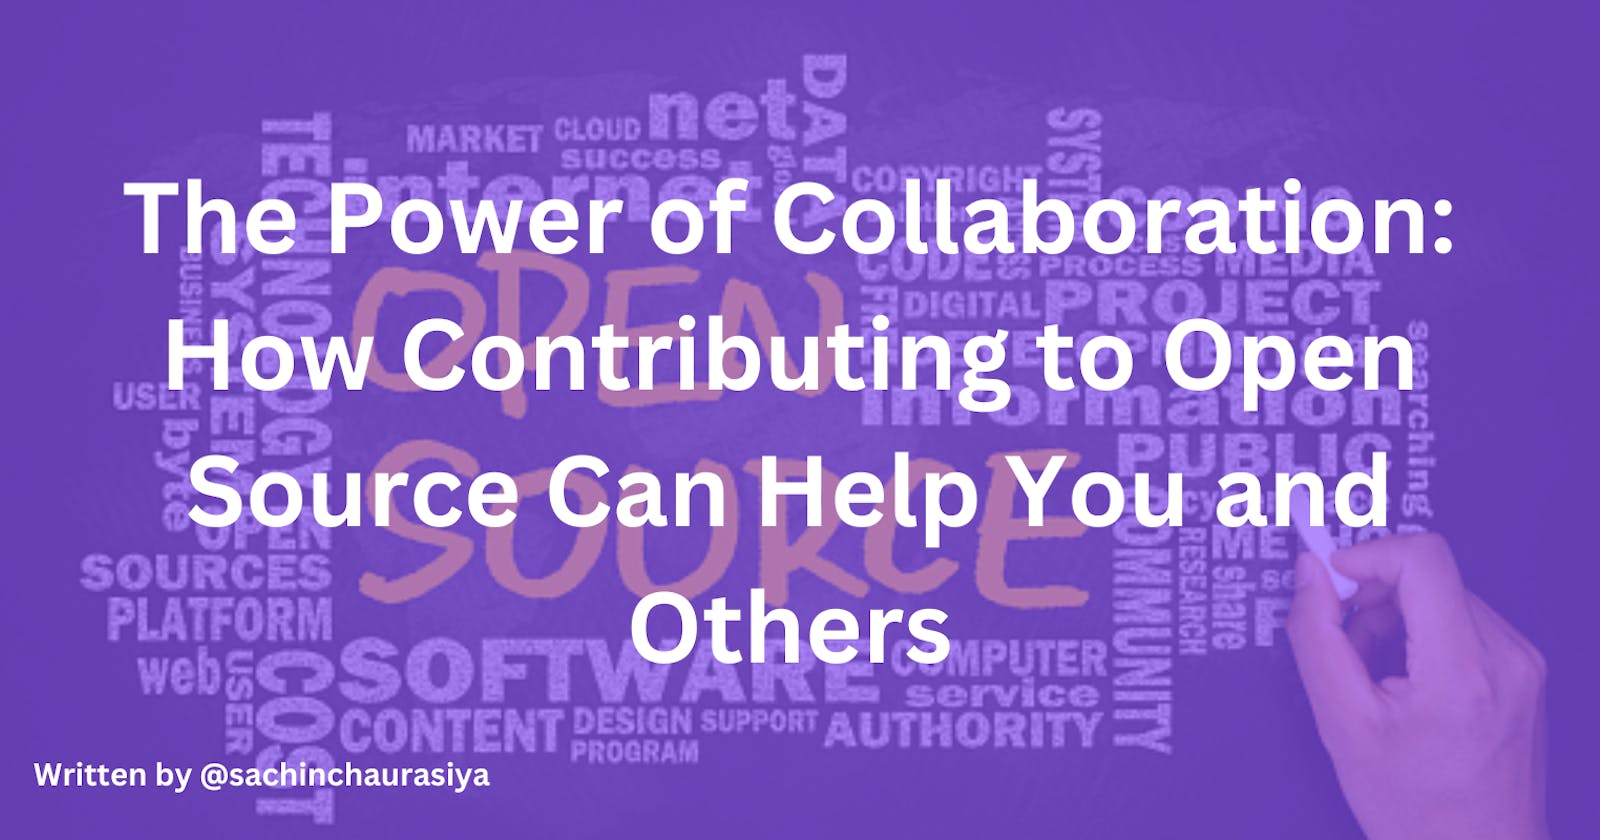 The Power of Collaboration: How Contributing to Open Source Can Help You and Others